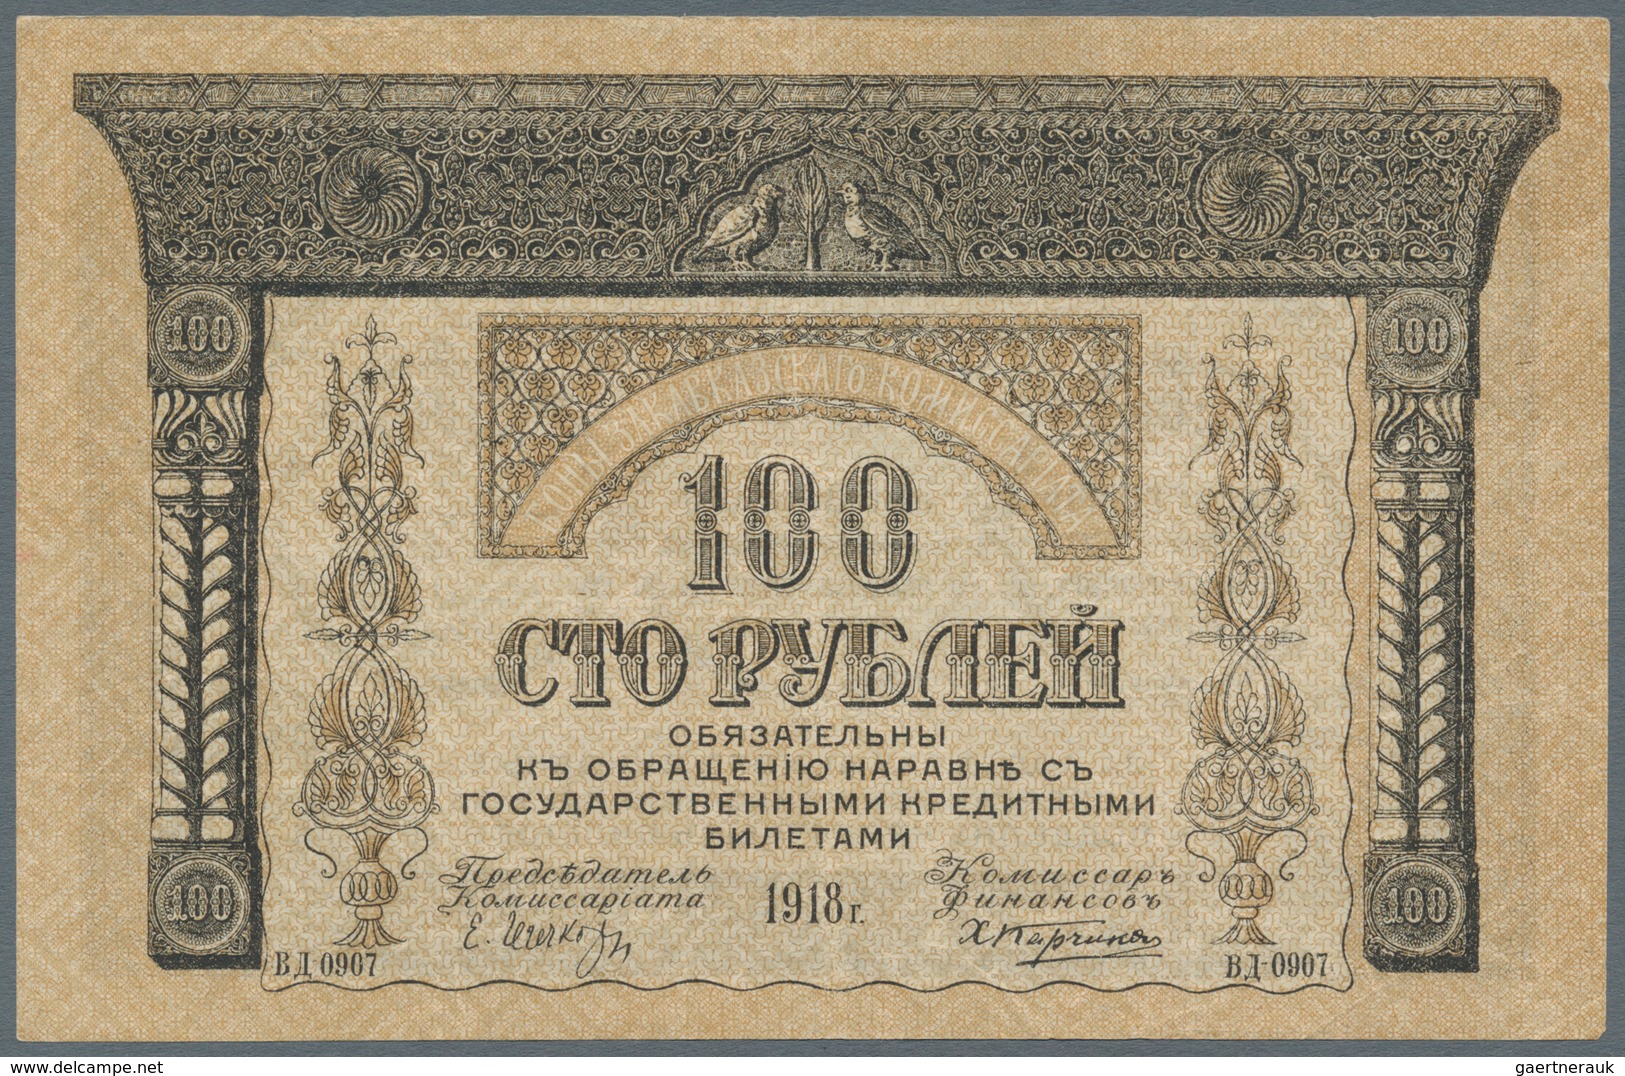 Russia / Russland: Transcaucasia set with 9 Banknotes including 1000 Rubles Azerbaijan Soviet Republ